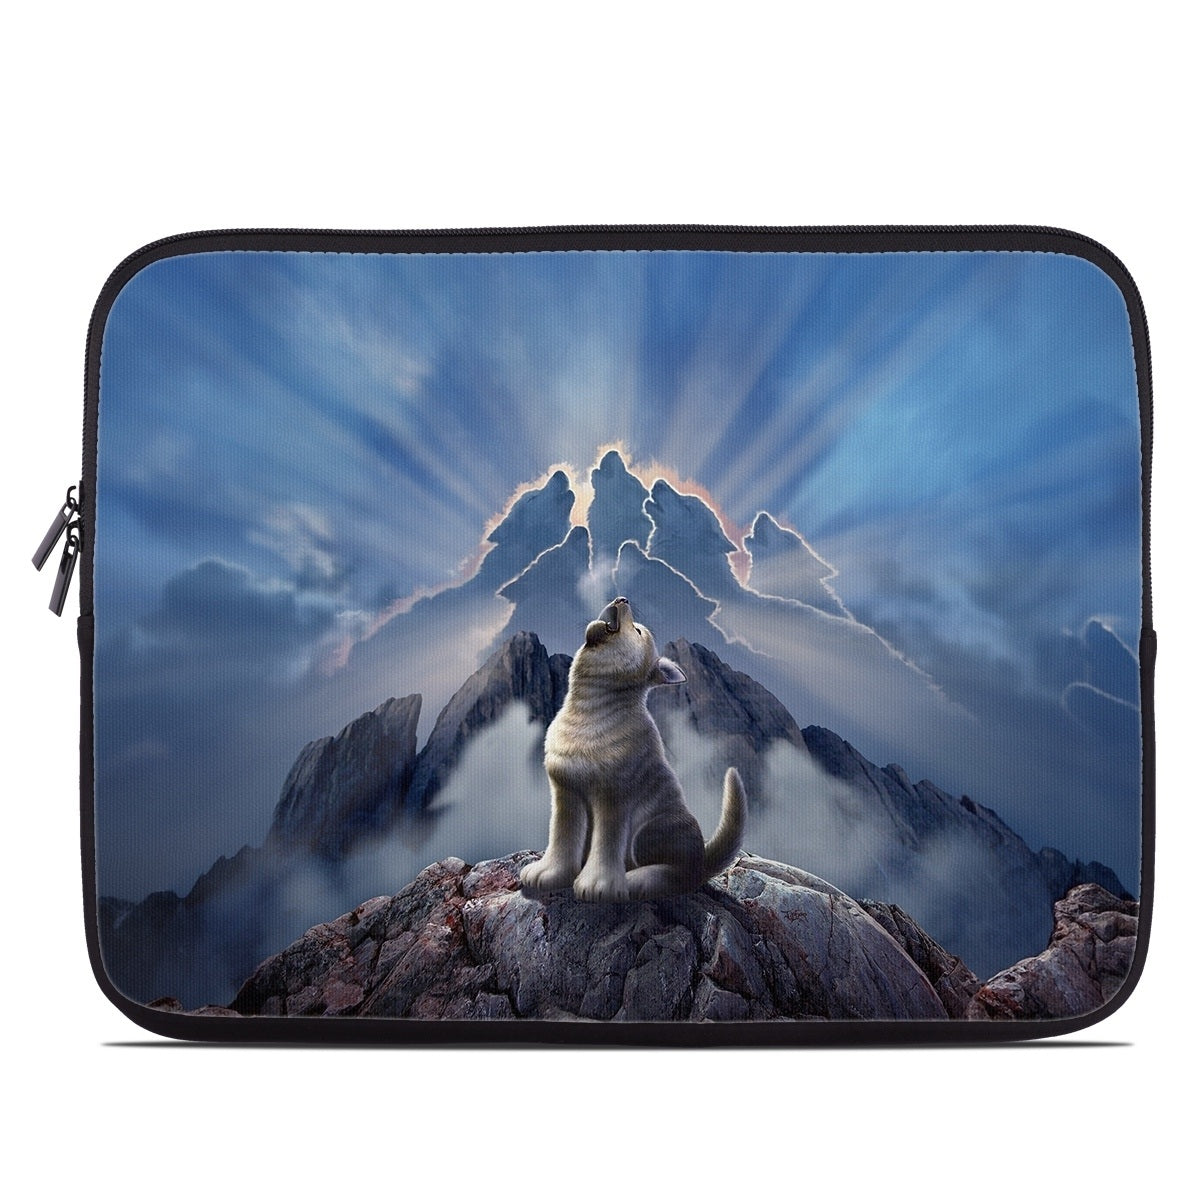 Leader of the Pack - Laptop Sleeve